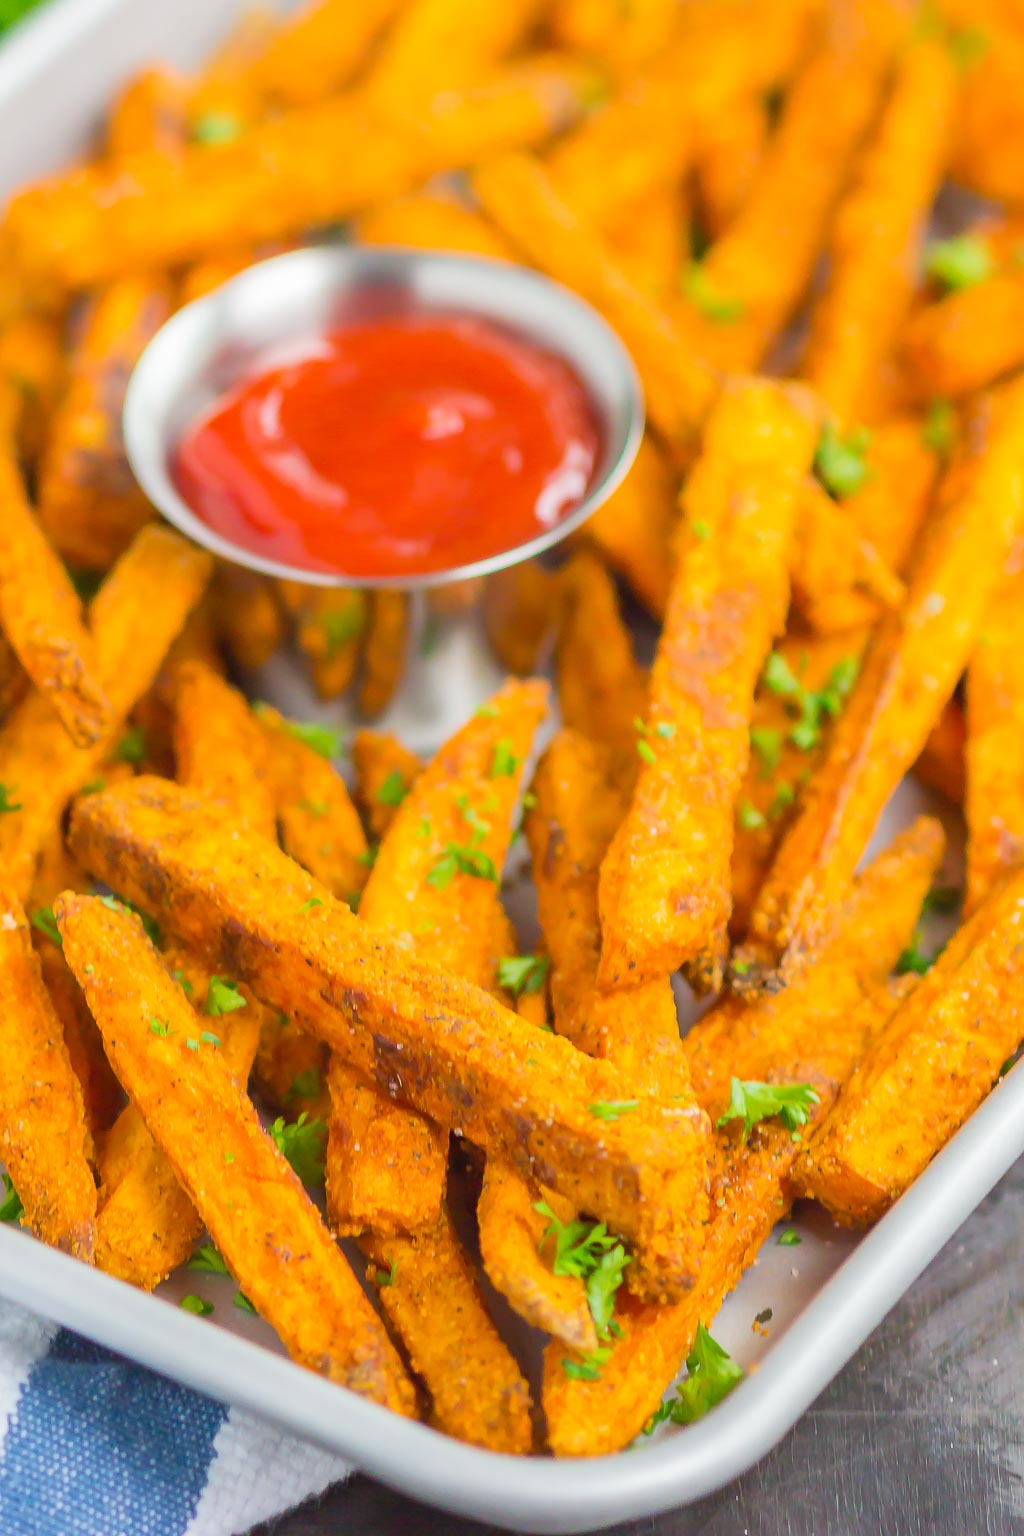 Crispy Baked Sweet Potato Fries are easy to make and seasoned to perfection. Healthier than the fried version and so delicious, theseÂ crunchy fries are perfect for a simple snack or side dish!